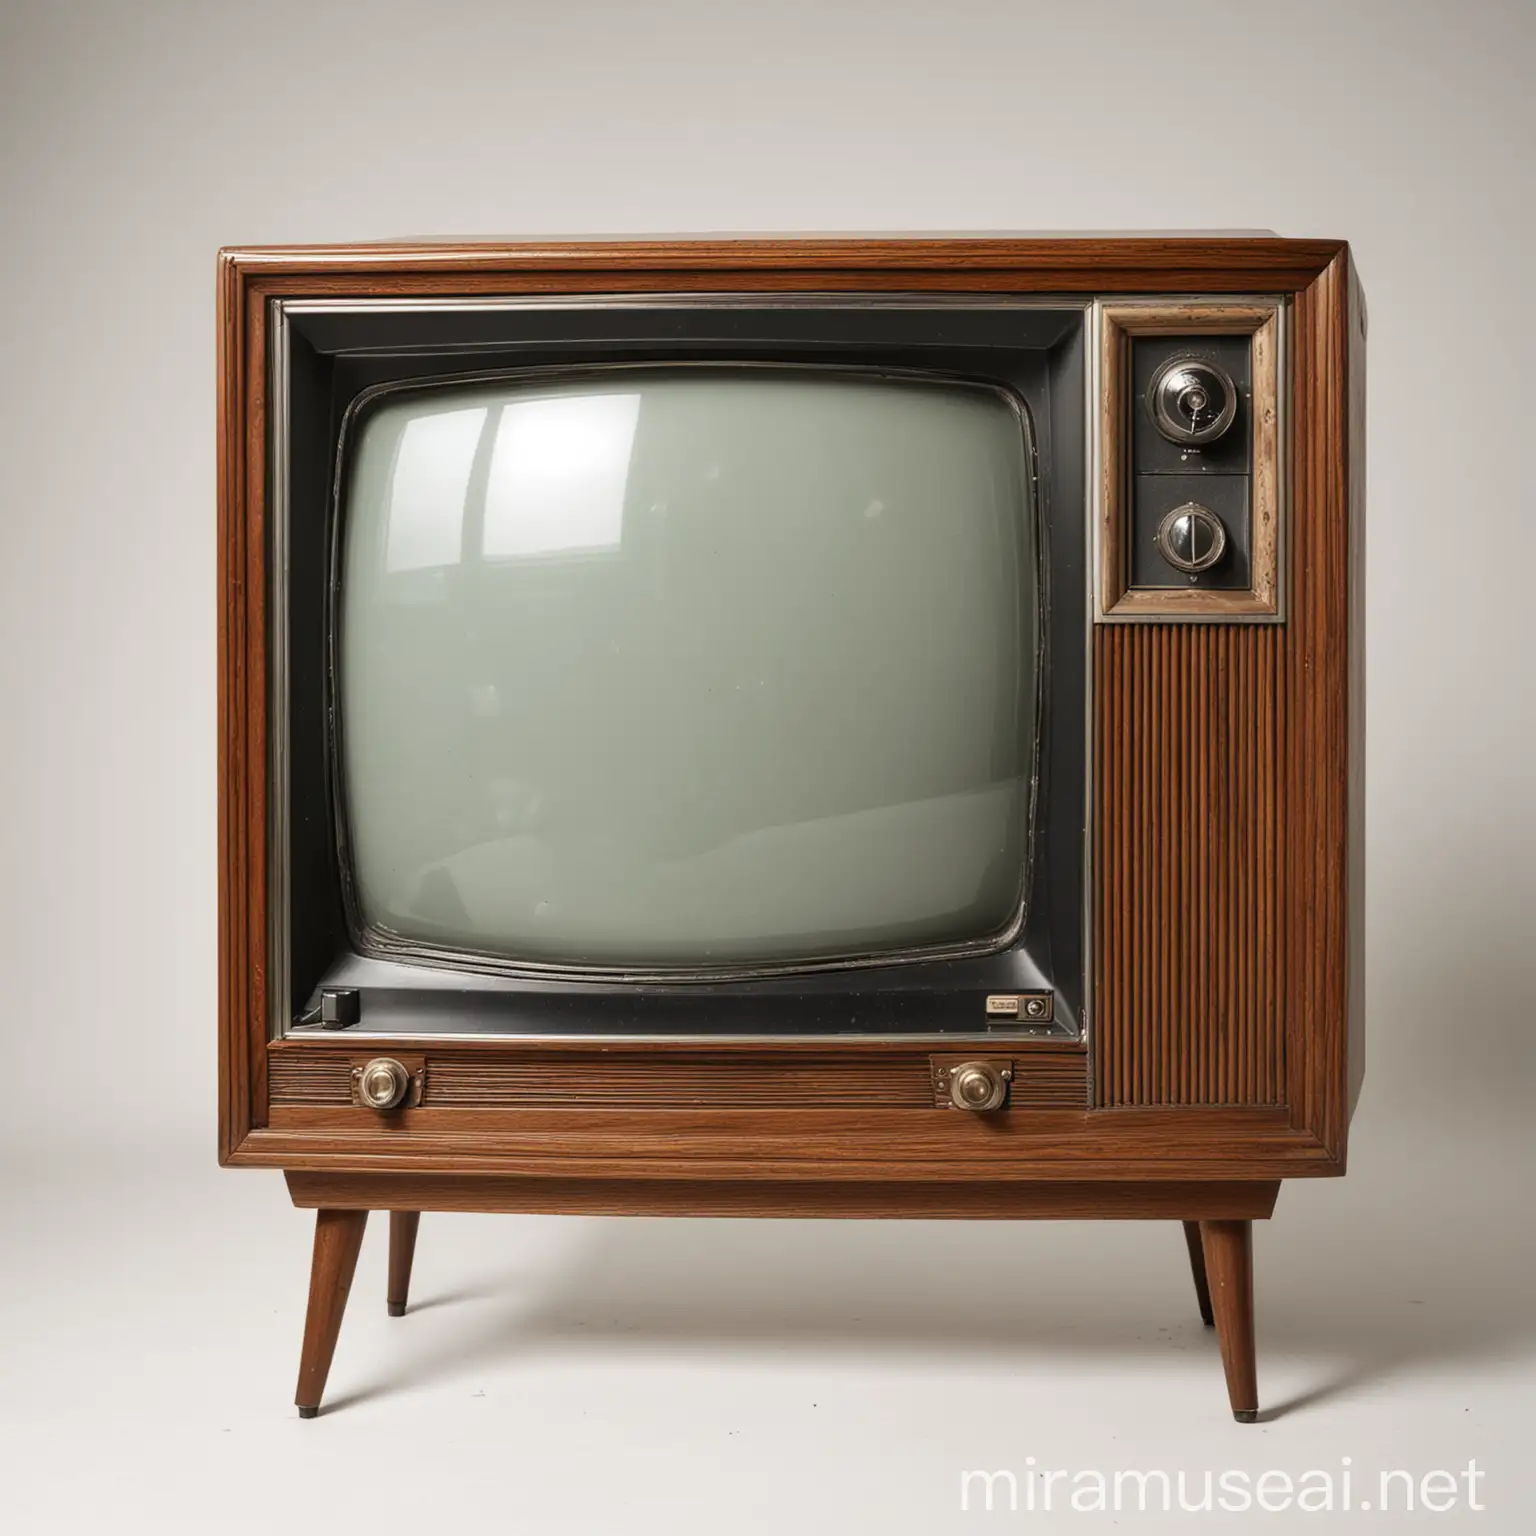 Vintage Console Television on White Background